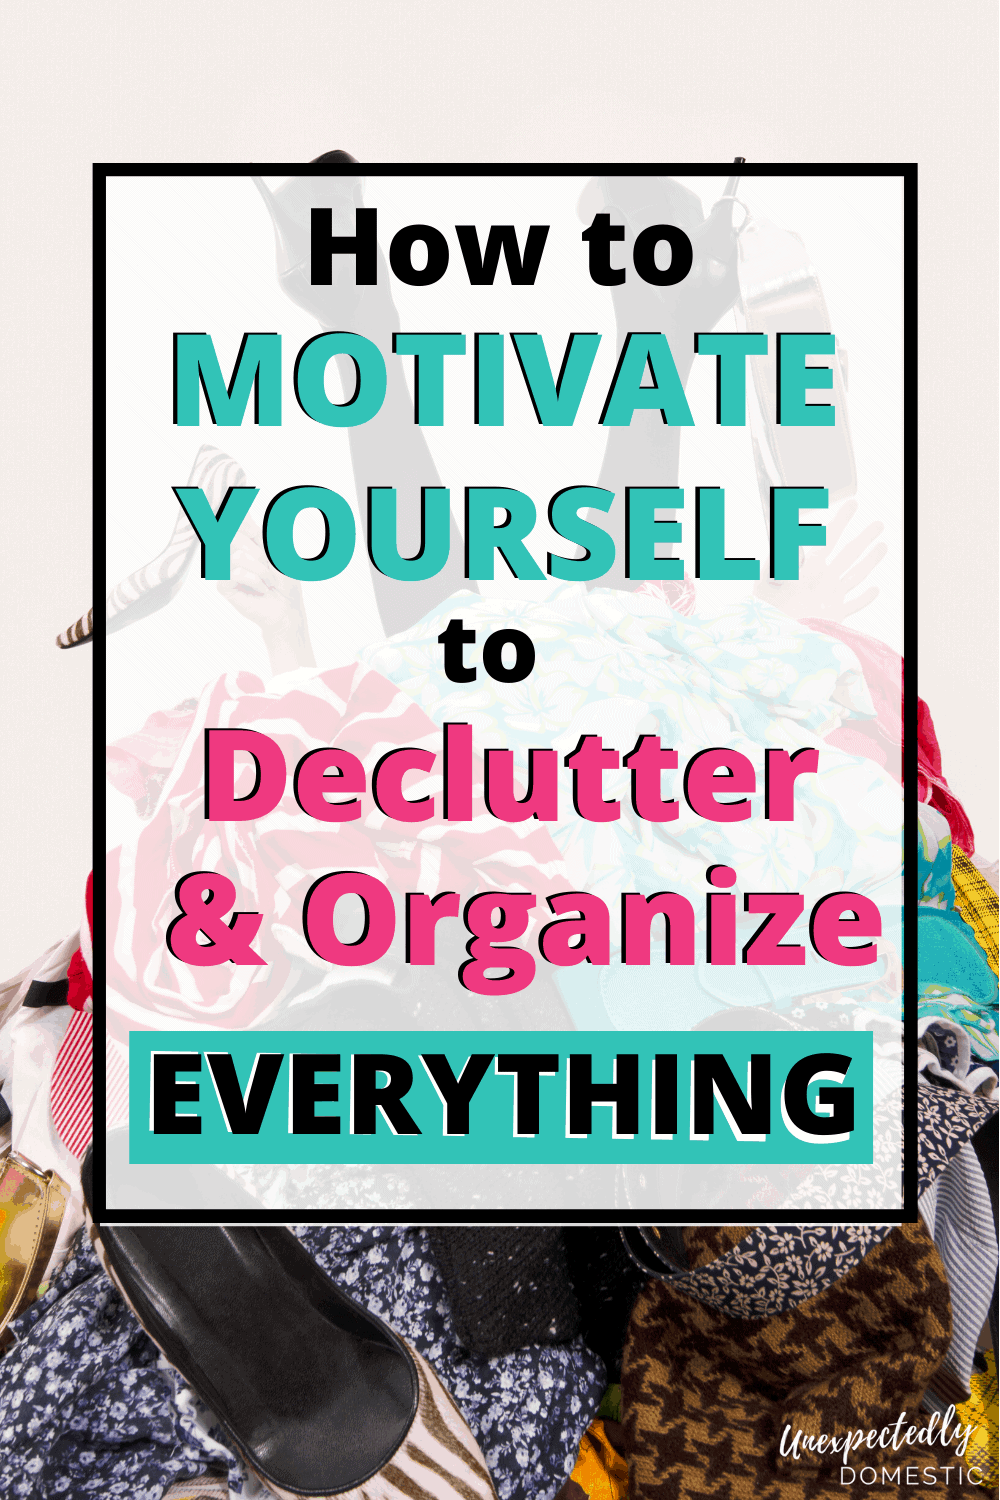 Decluttering motivation tips for tackling clutter and getting organized! How to find the motivation to declutter your home and get rid of stuff.